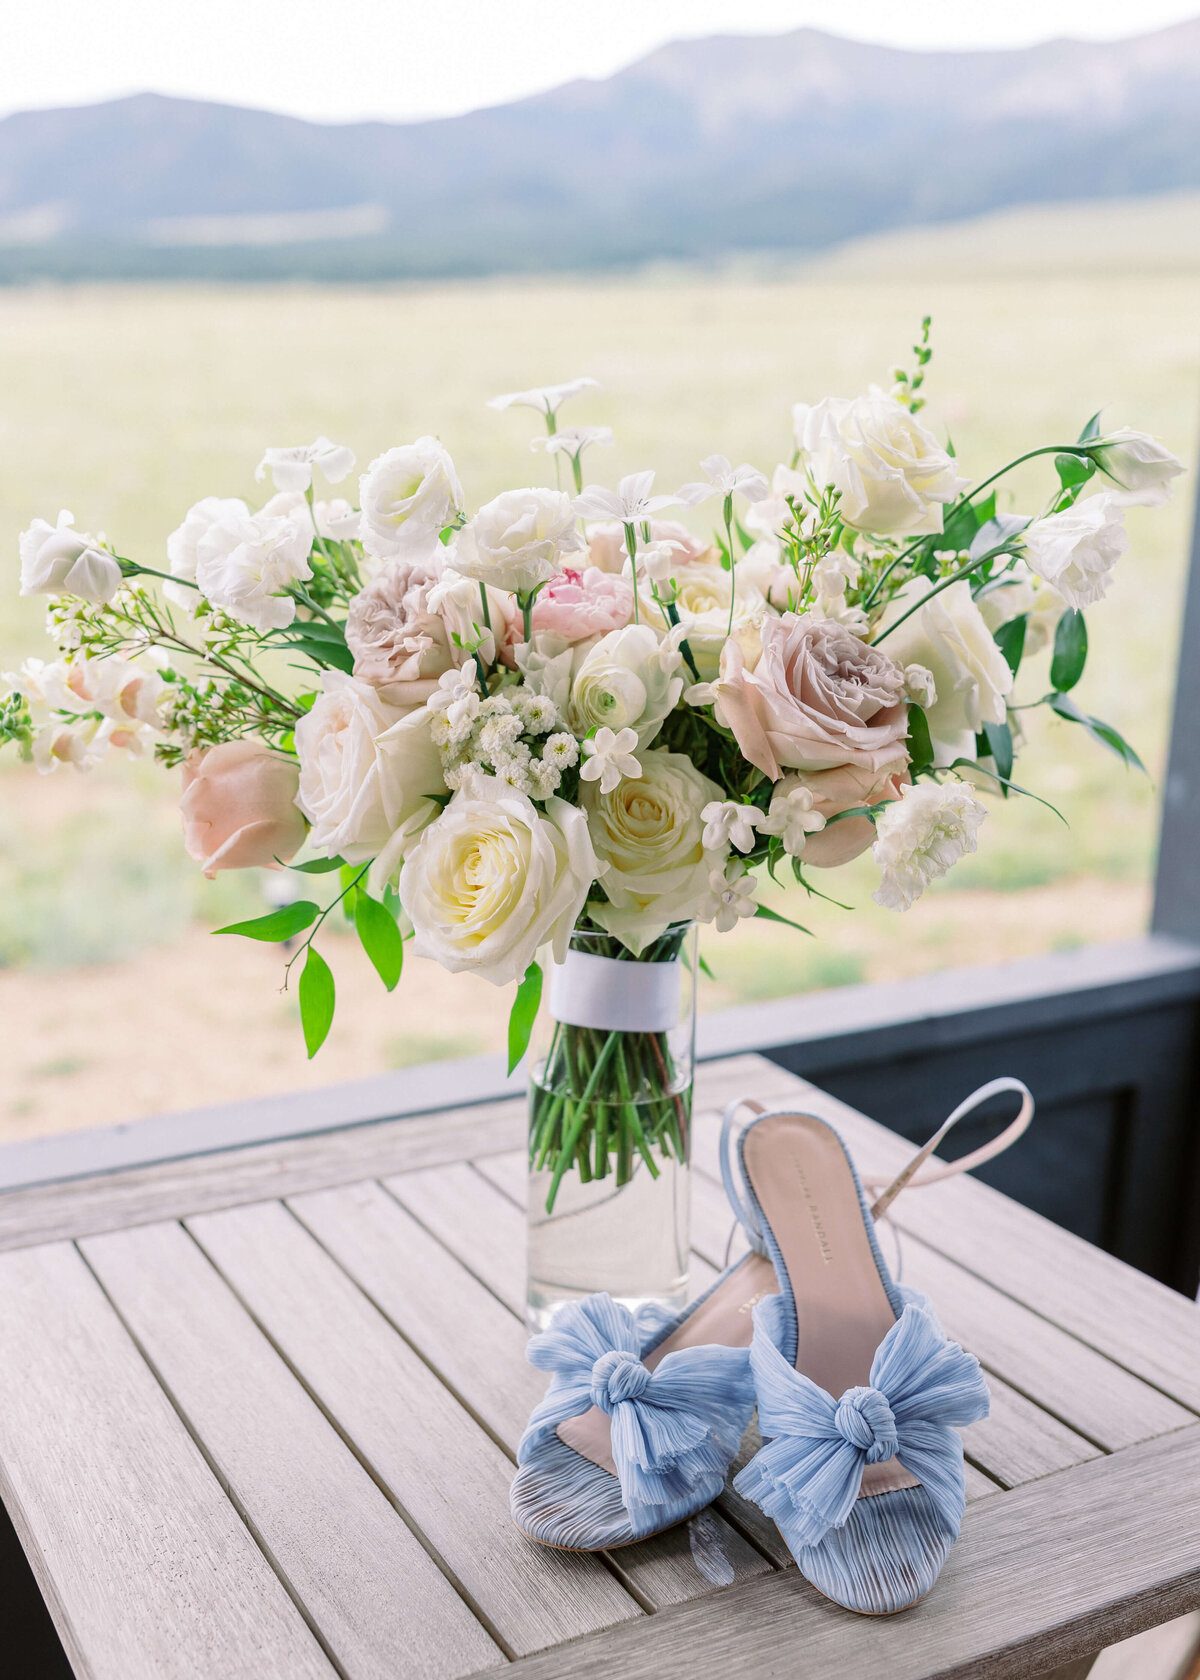 White, pink and beige florals complement the bride's light blue shoes through a palette of pastels